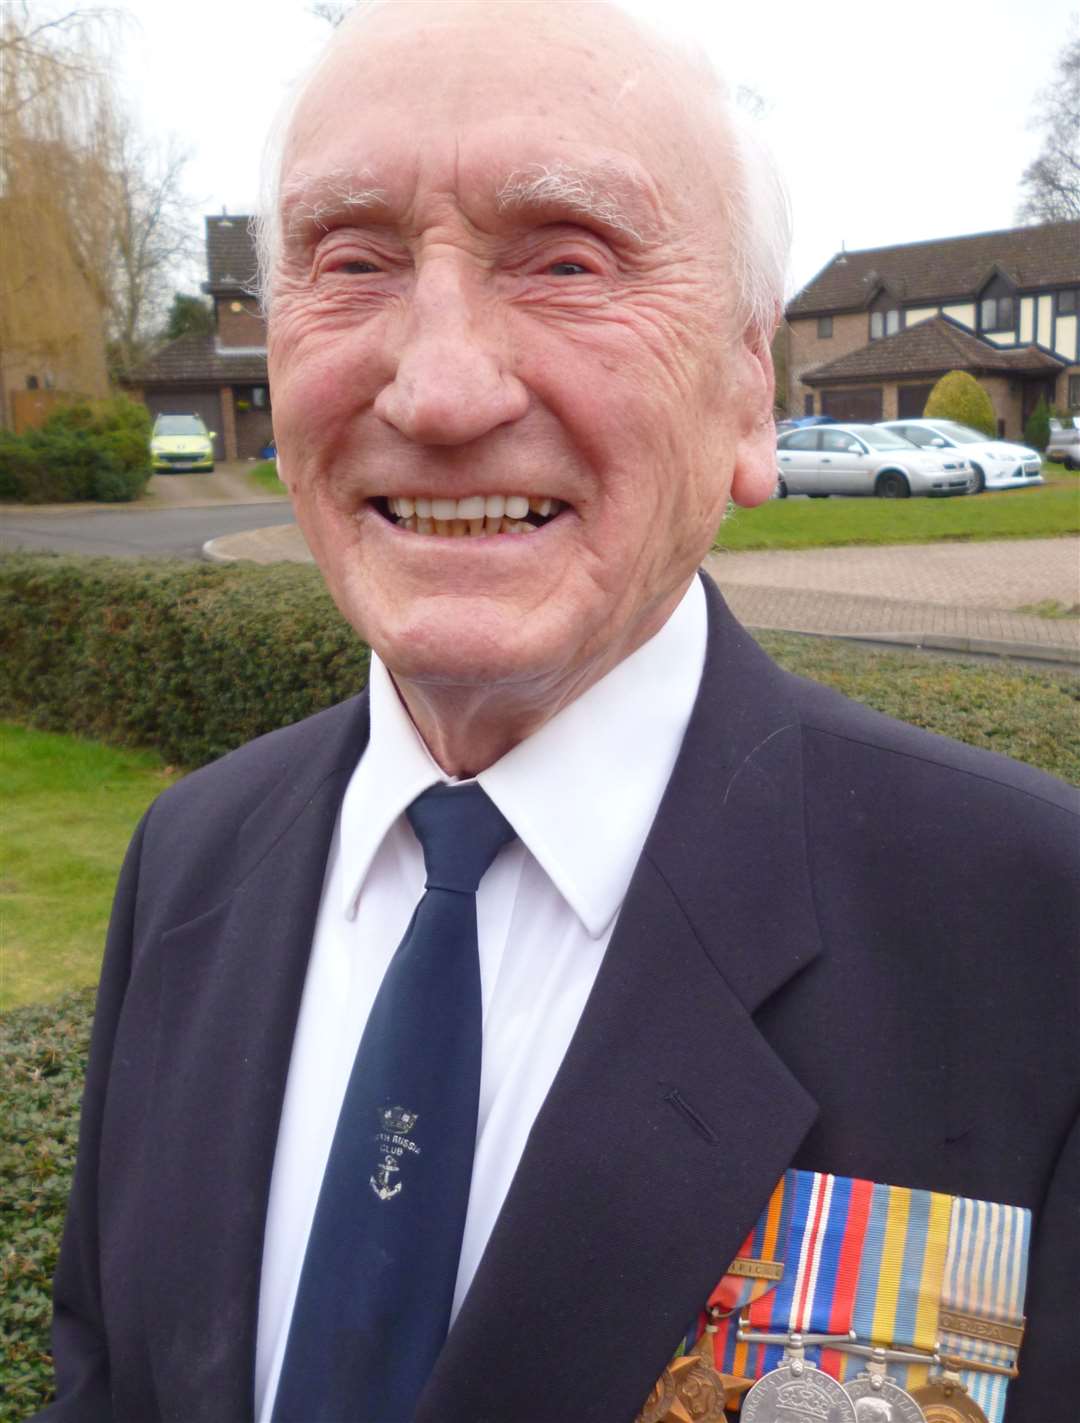 War hero John Lawrence served on the Arctic convoy missions